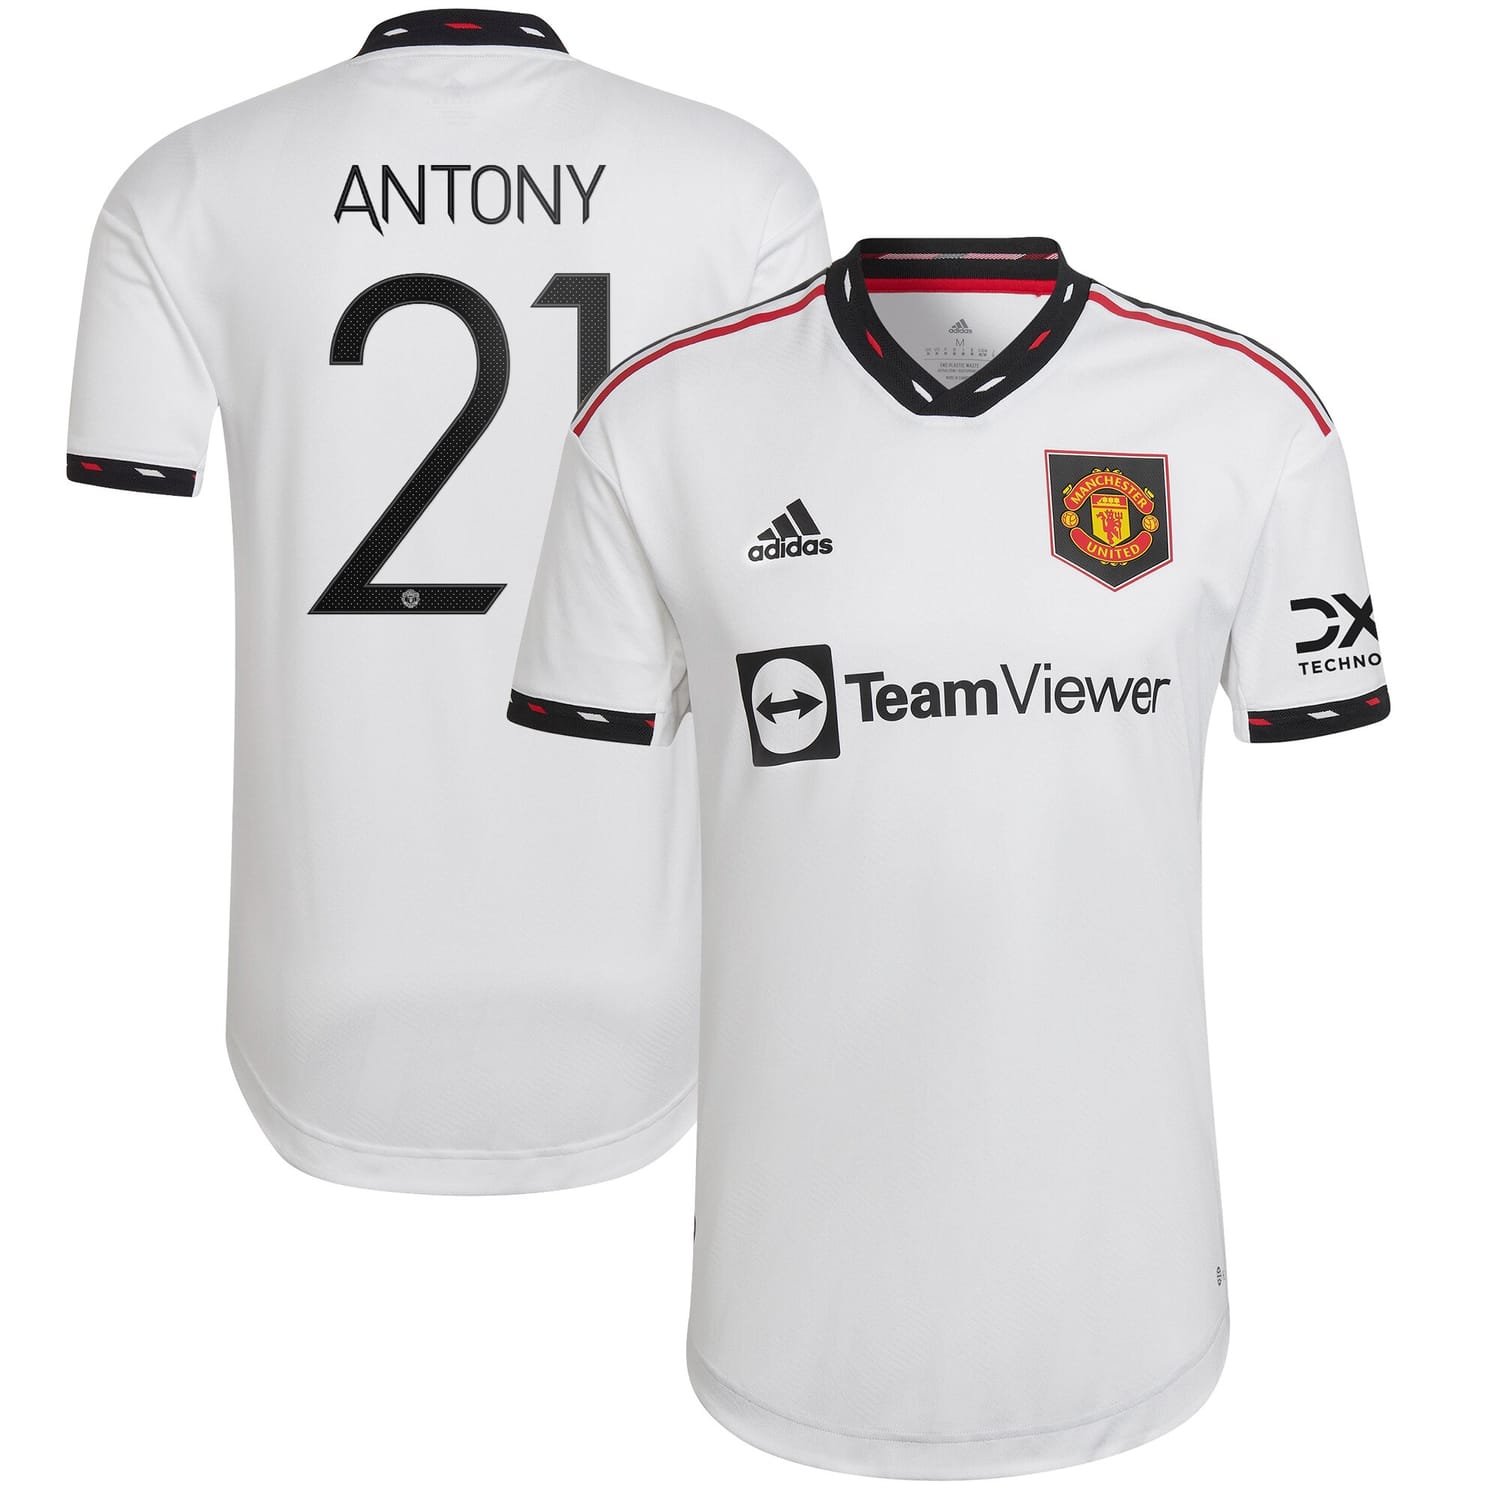 Premier League Manchester United Away Cup Authentic Jersey Shirt 2022-23 player Antony 21 printing for Men